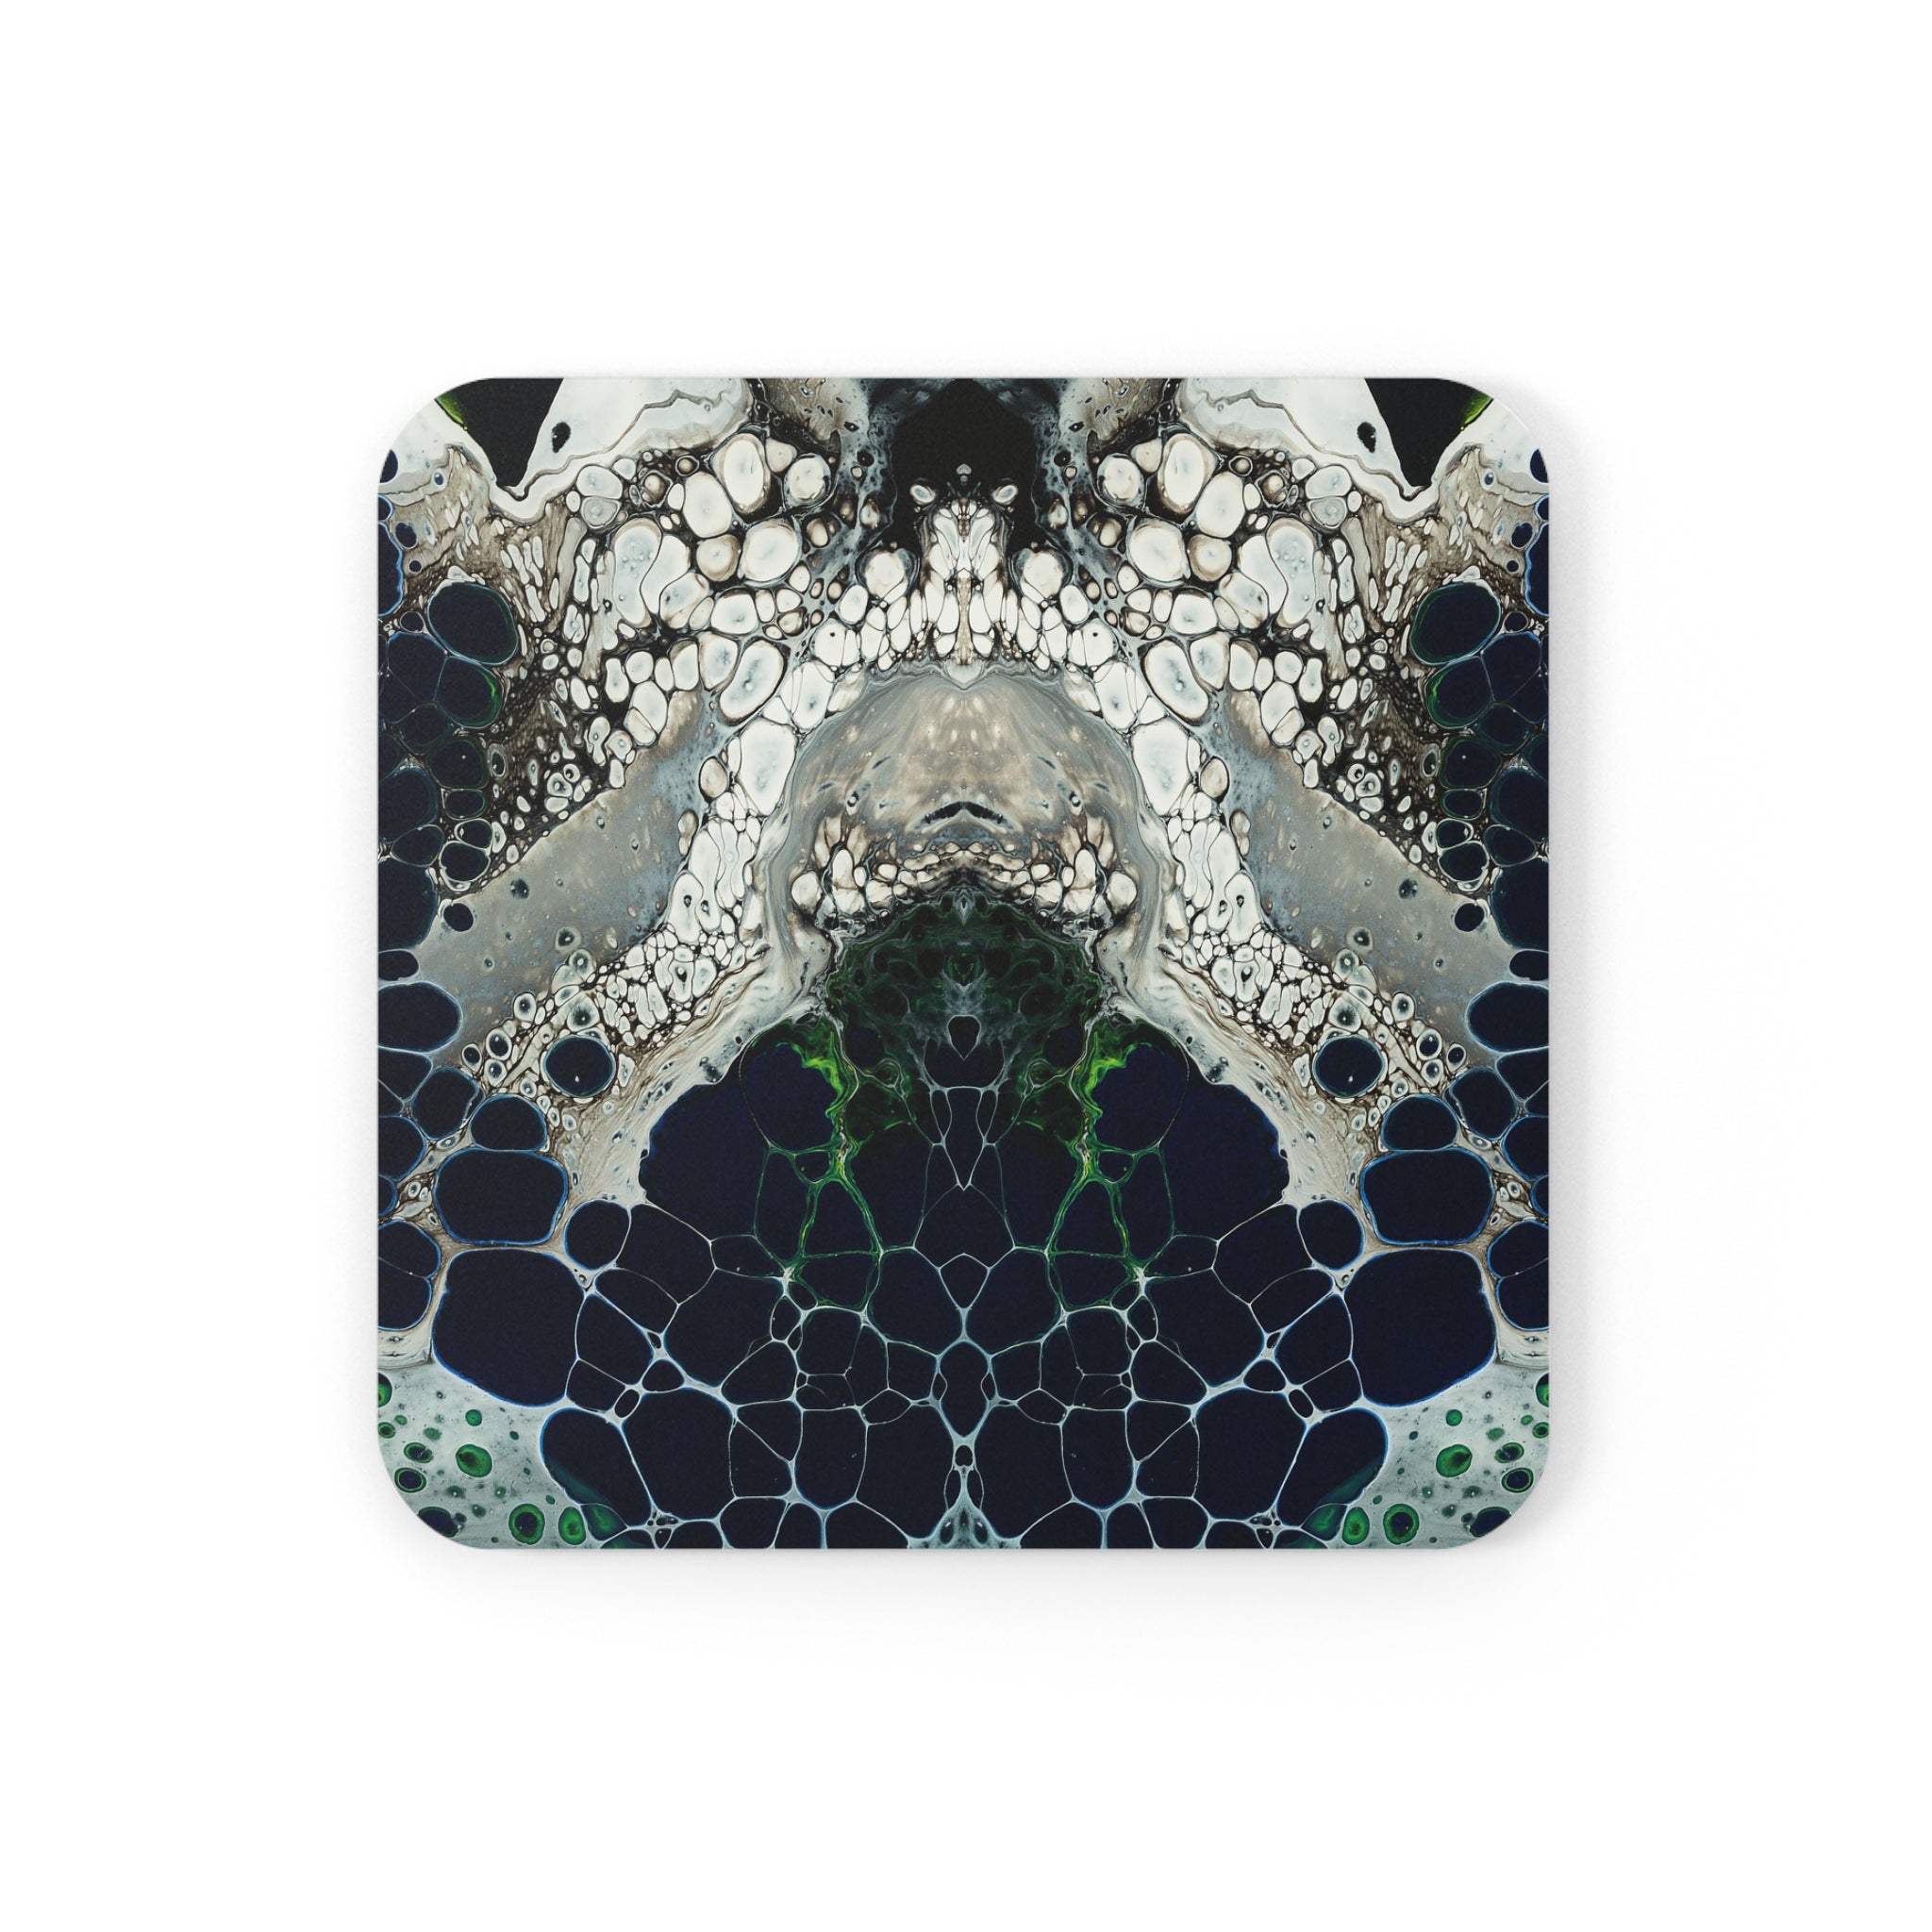 Cameron Creations - Celestial Roads - Stylish Coffee Coaster - Square Front